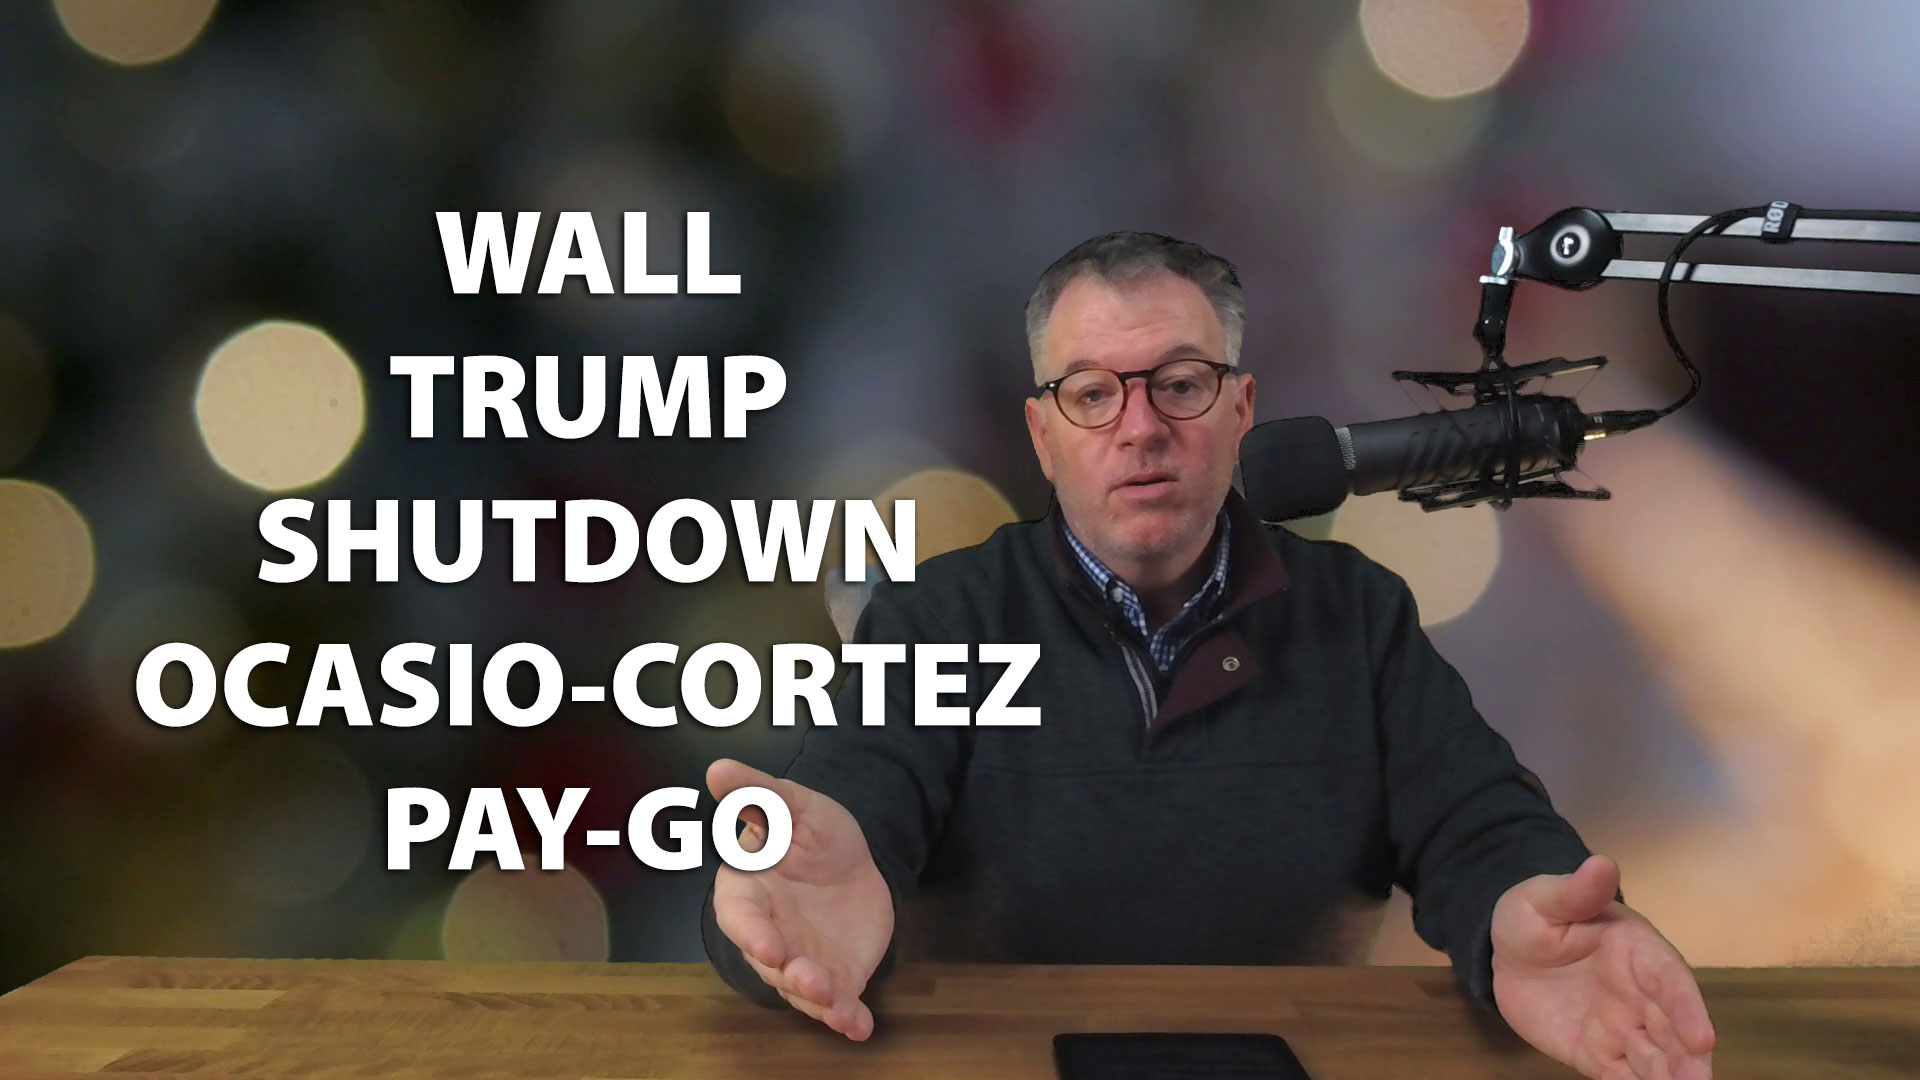 I discuss President Trump, the wall on the Mexican border and the federal government shutdown.